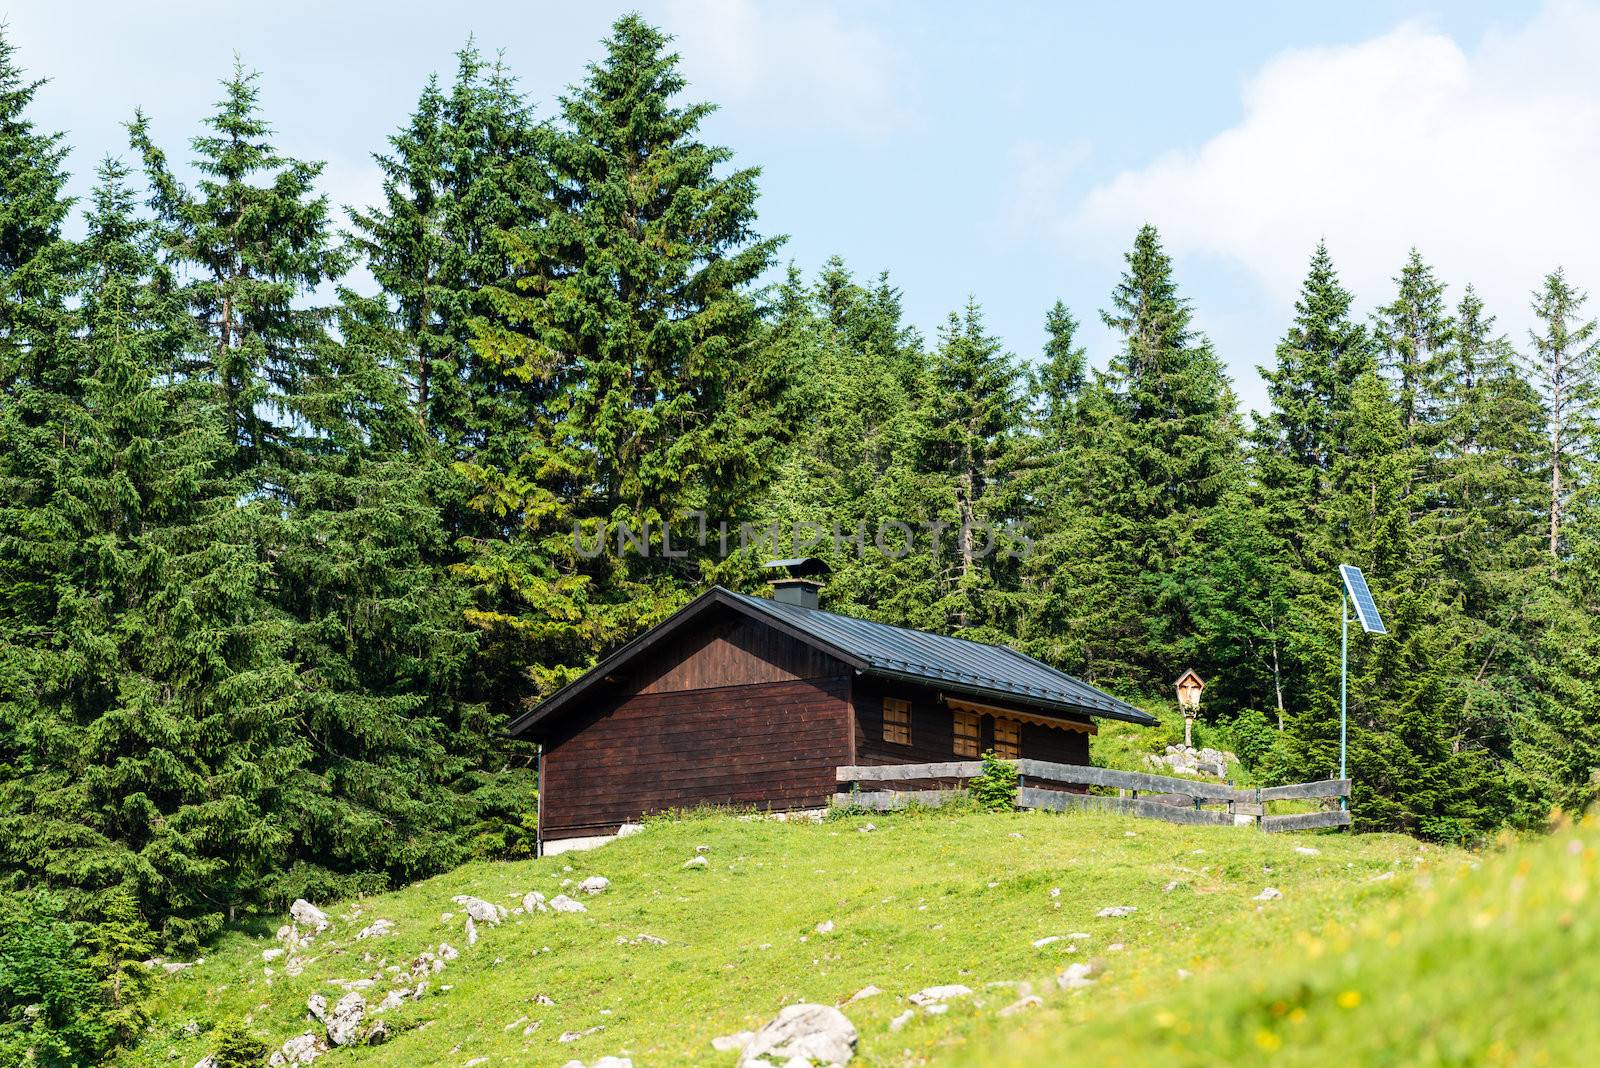 Wooden mountain refuge with solar panels and display of a holy figure in the Bavarian Alps